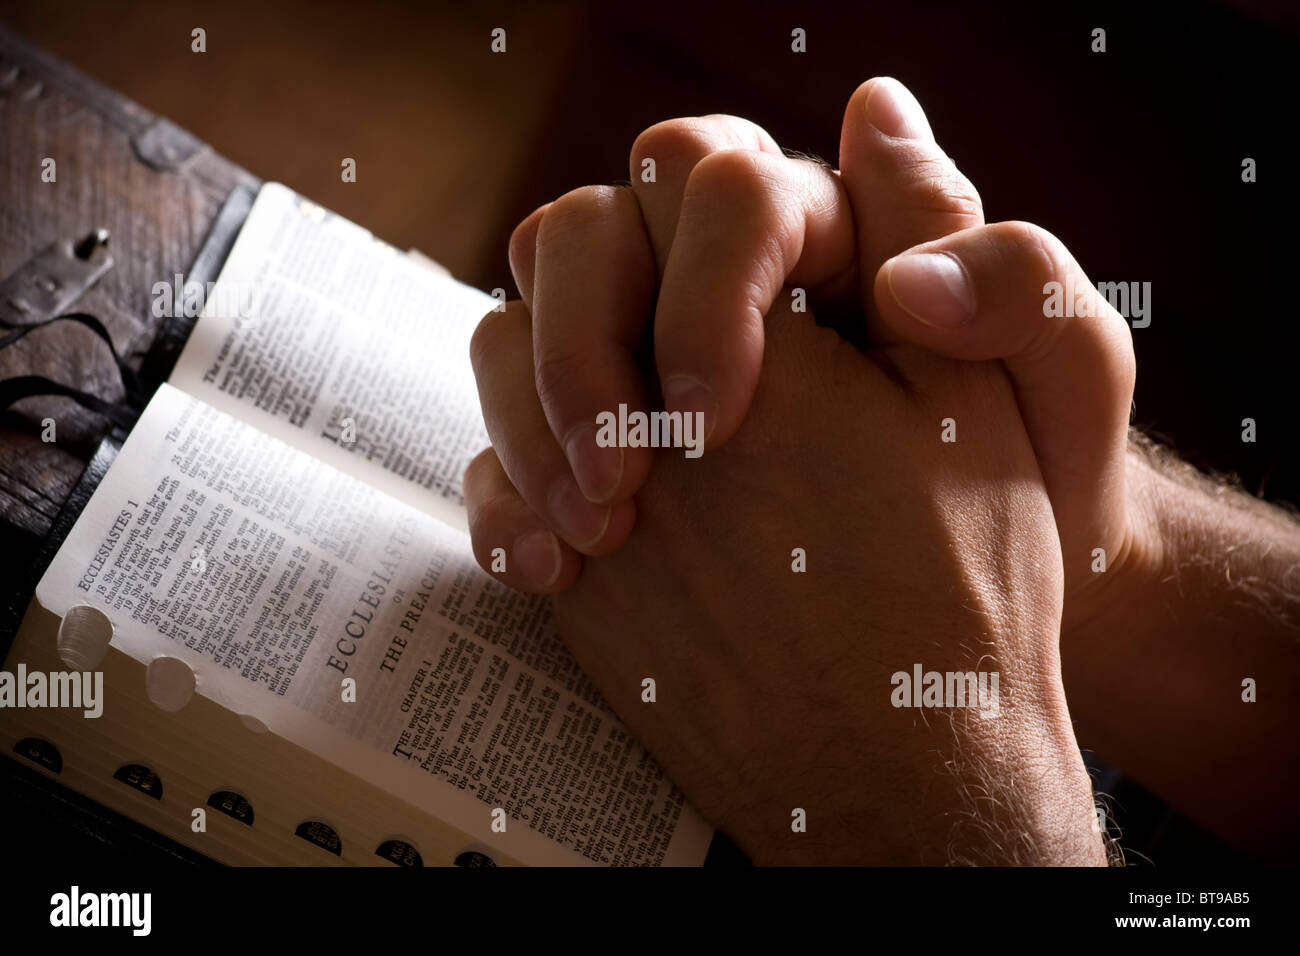 Praying hands on an open bible Stock Photo - Alamy